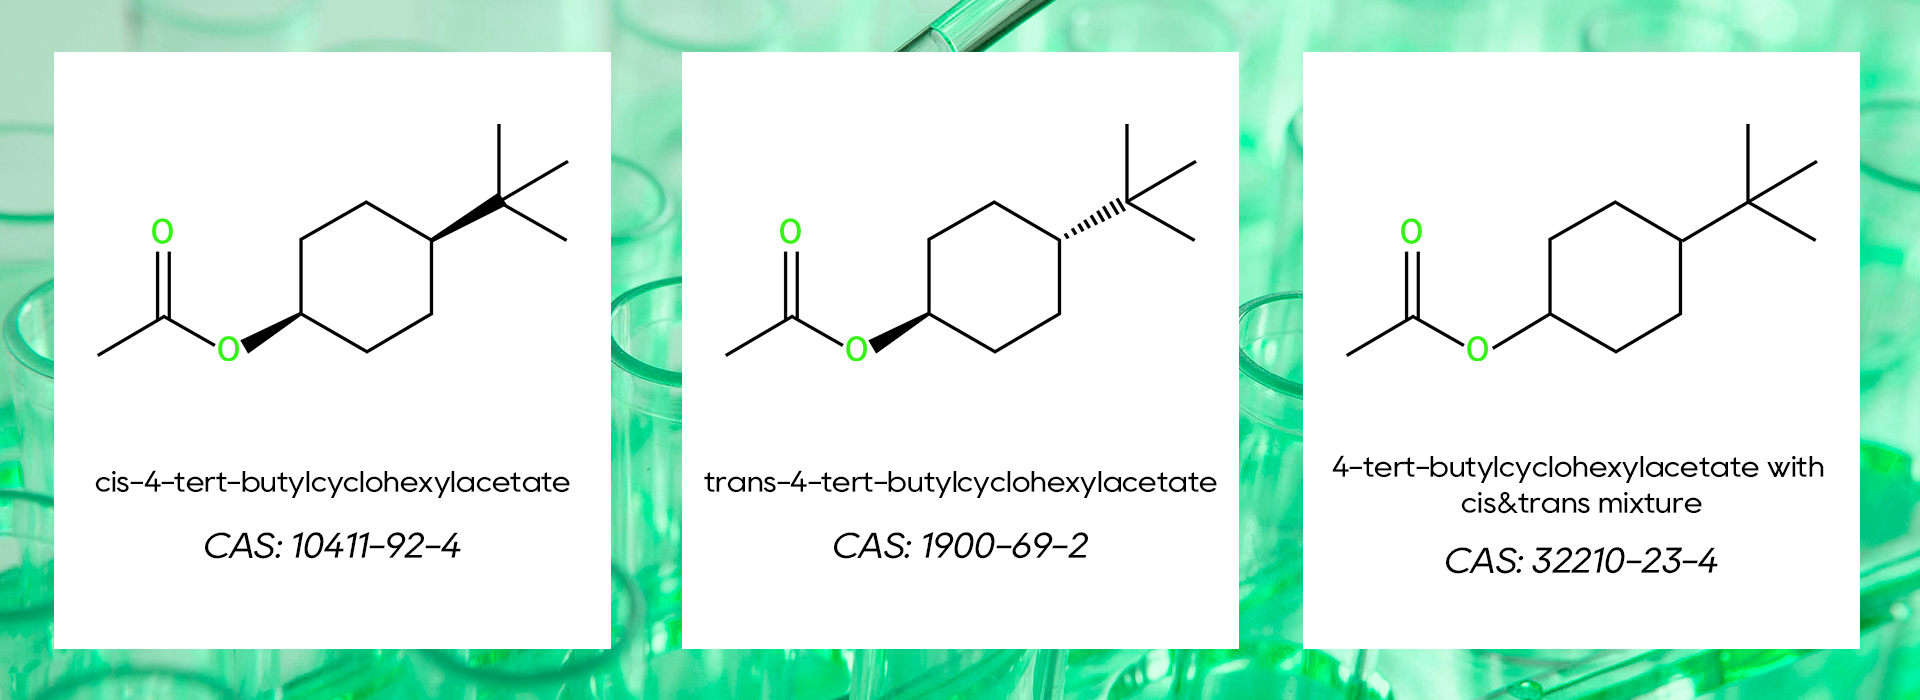 Launched! High-purity woody acetate (cis‐4-tert-butylcyclohexylacetate)